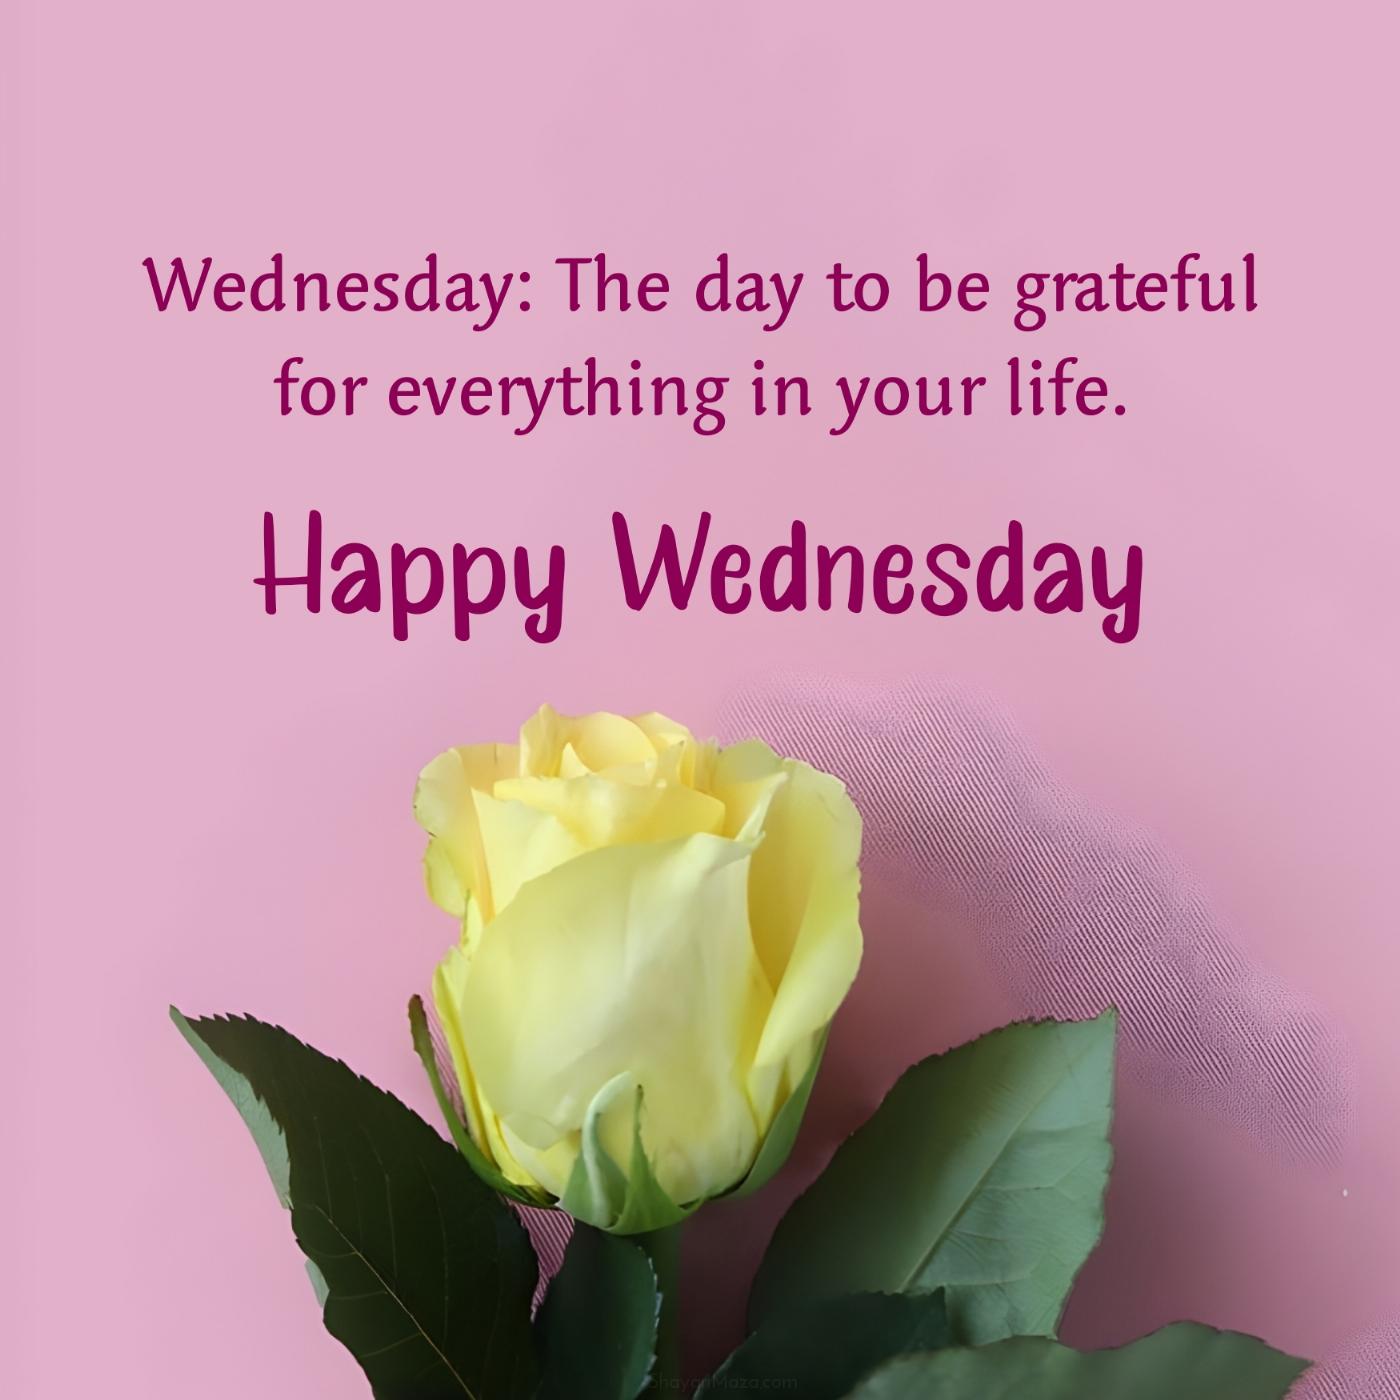 Wednesday: The day to be grateful for everything